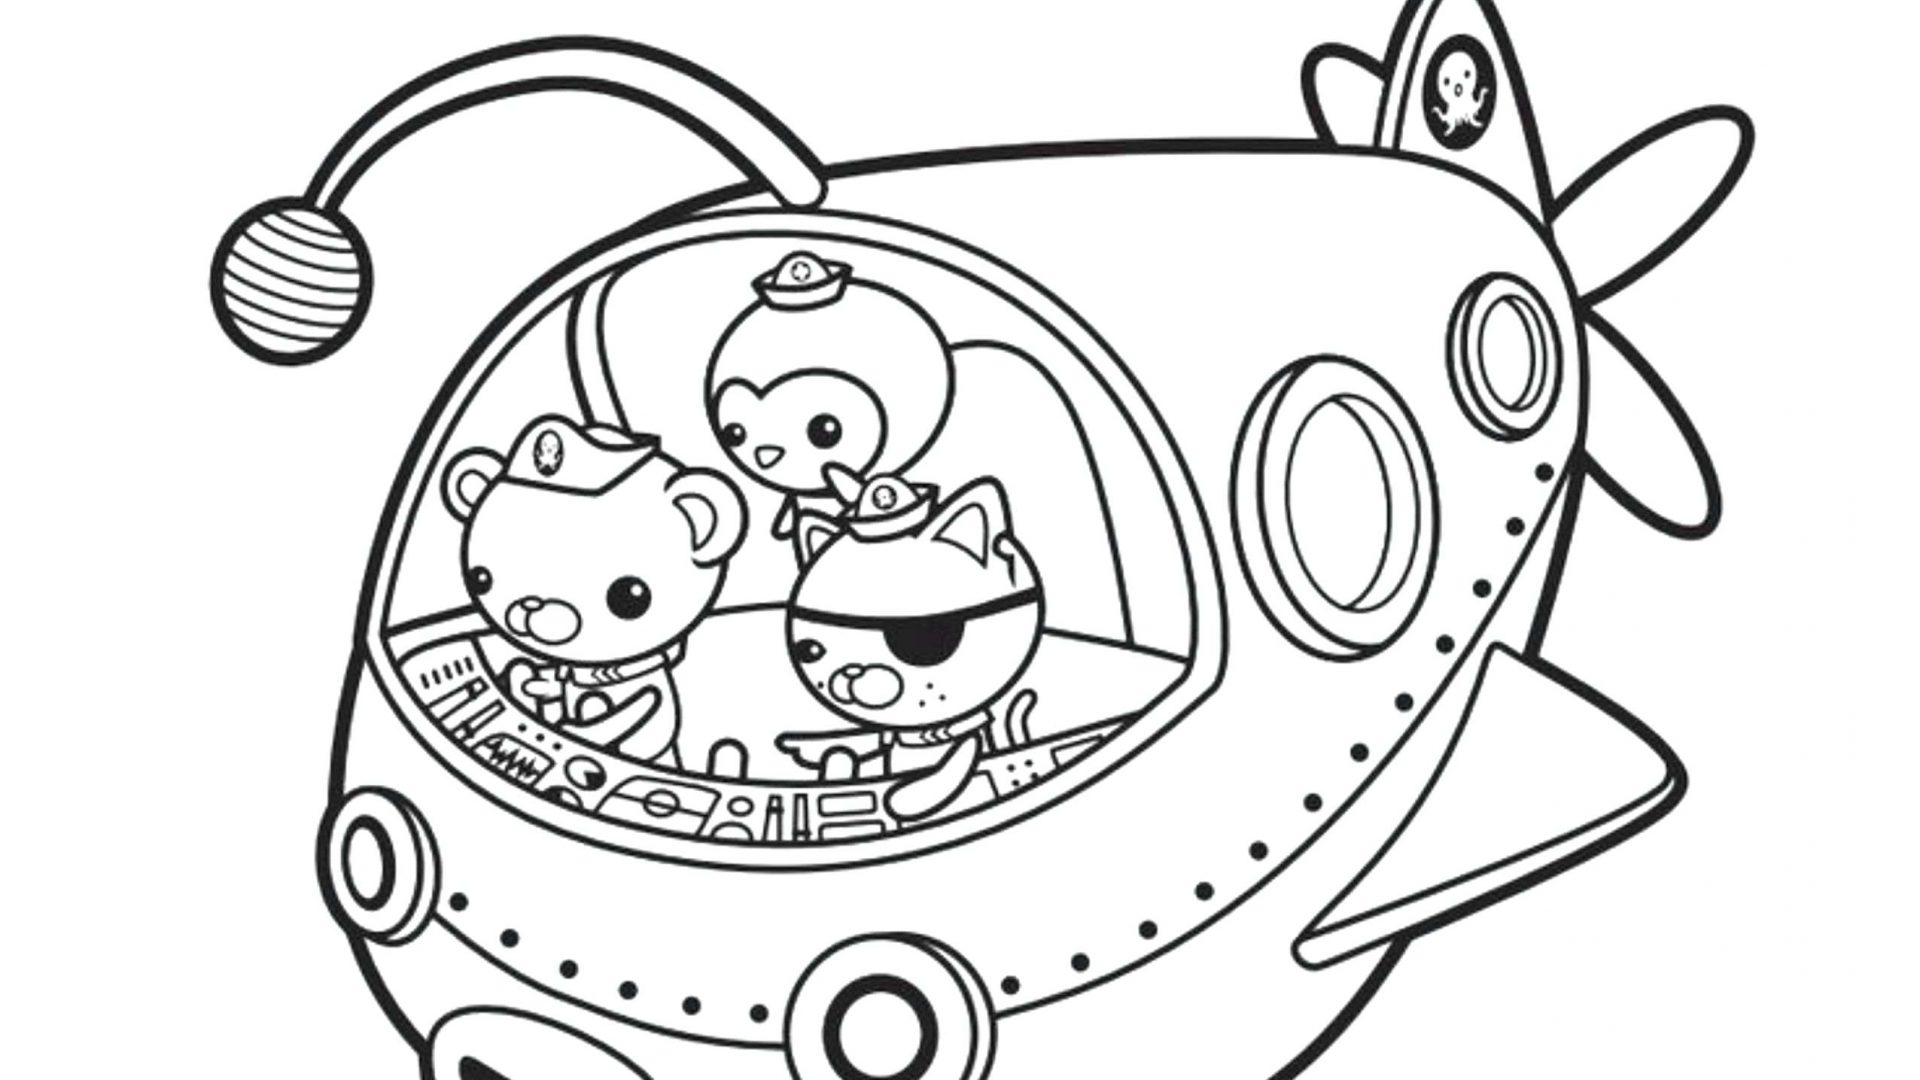 Download Octonauts Coloring Pages To Print at GetDrawings.com | Free for personal use Octonauts Coloring ...